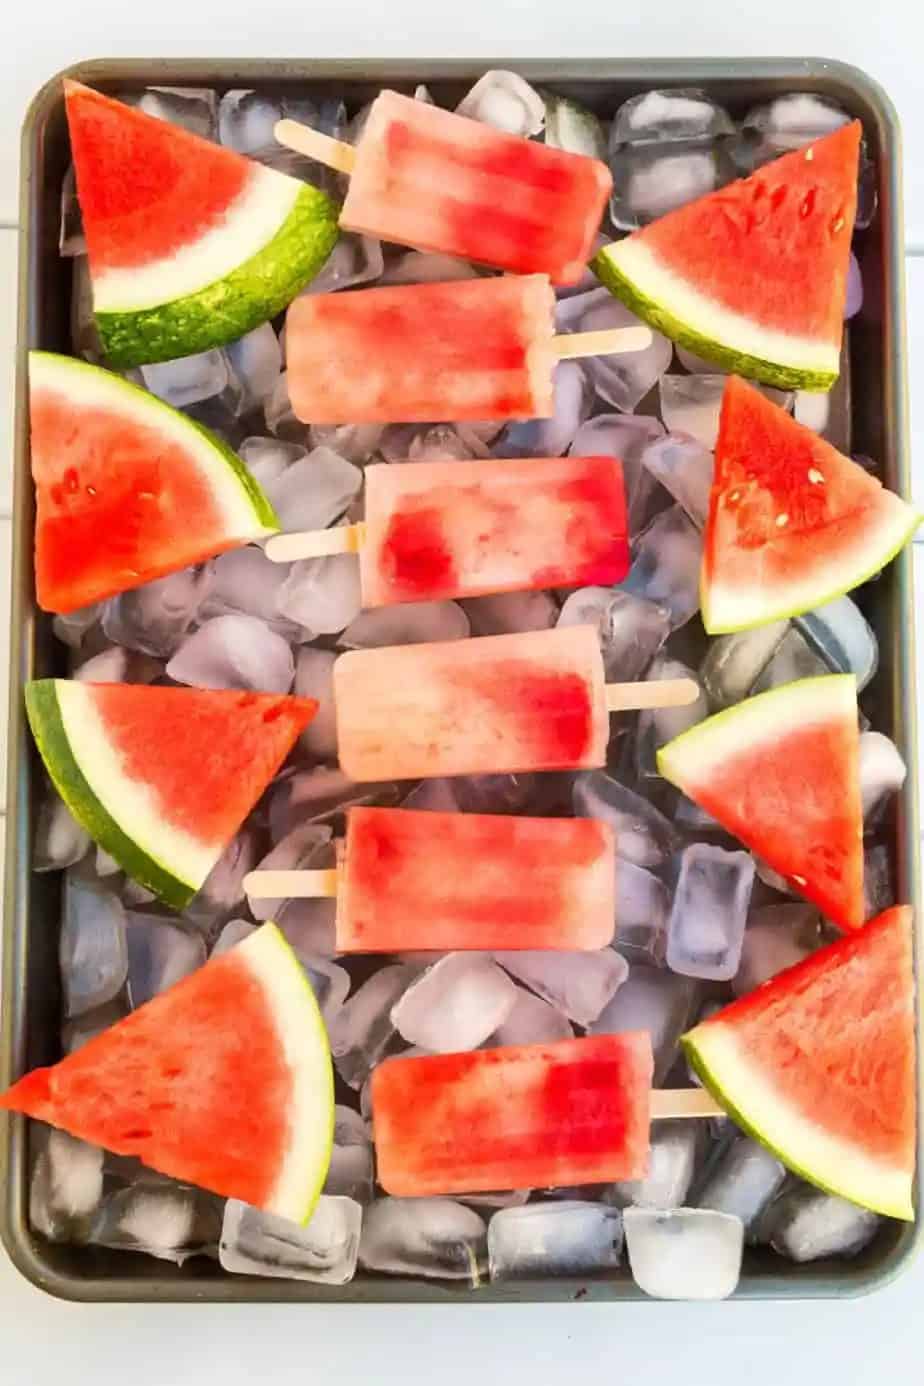 Watermelon popsicles on ice with fresh watermelon slices.